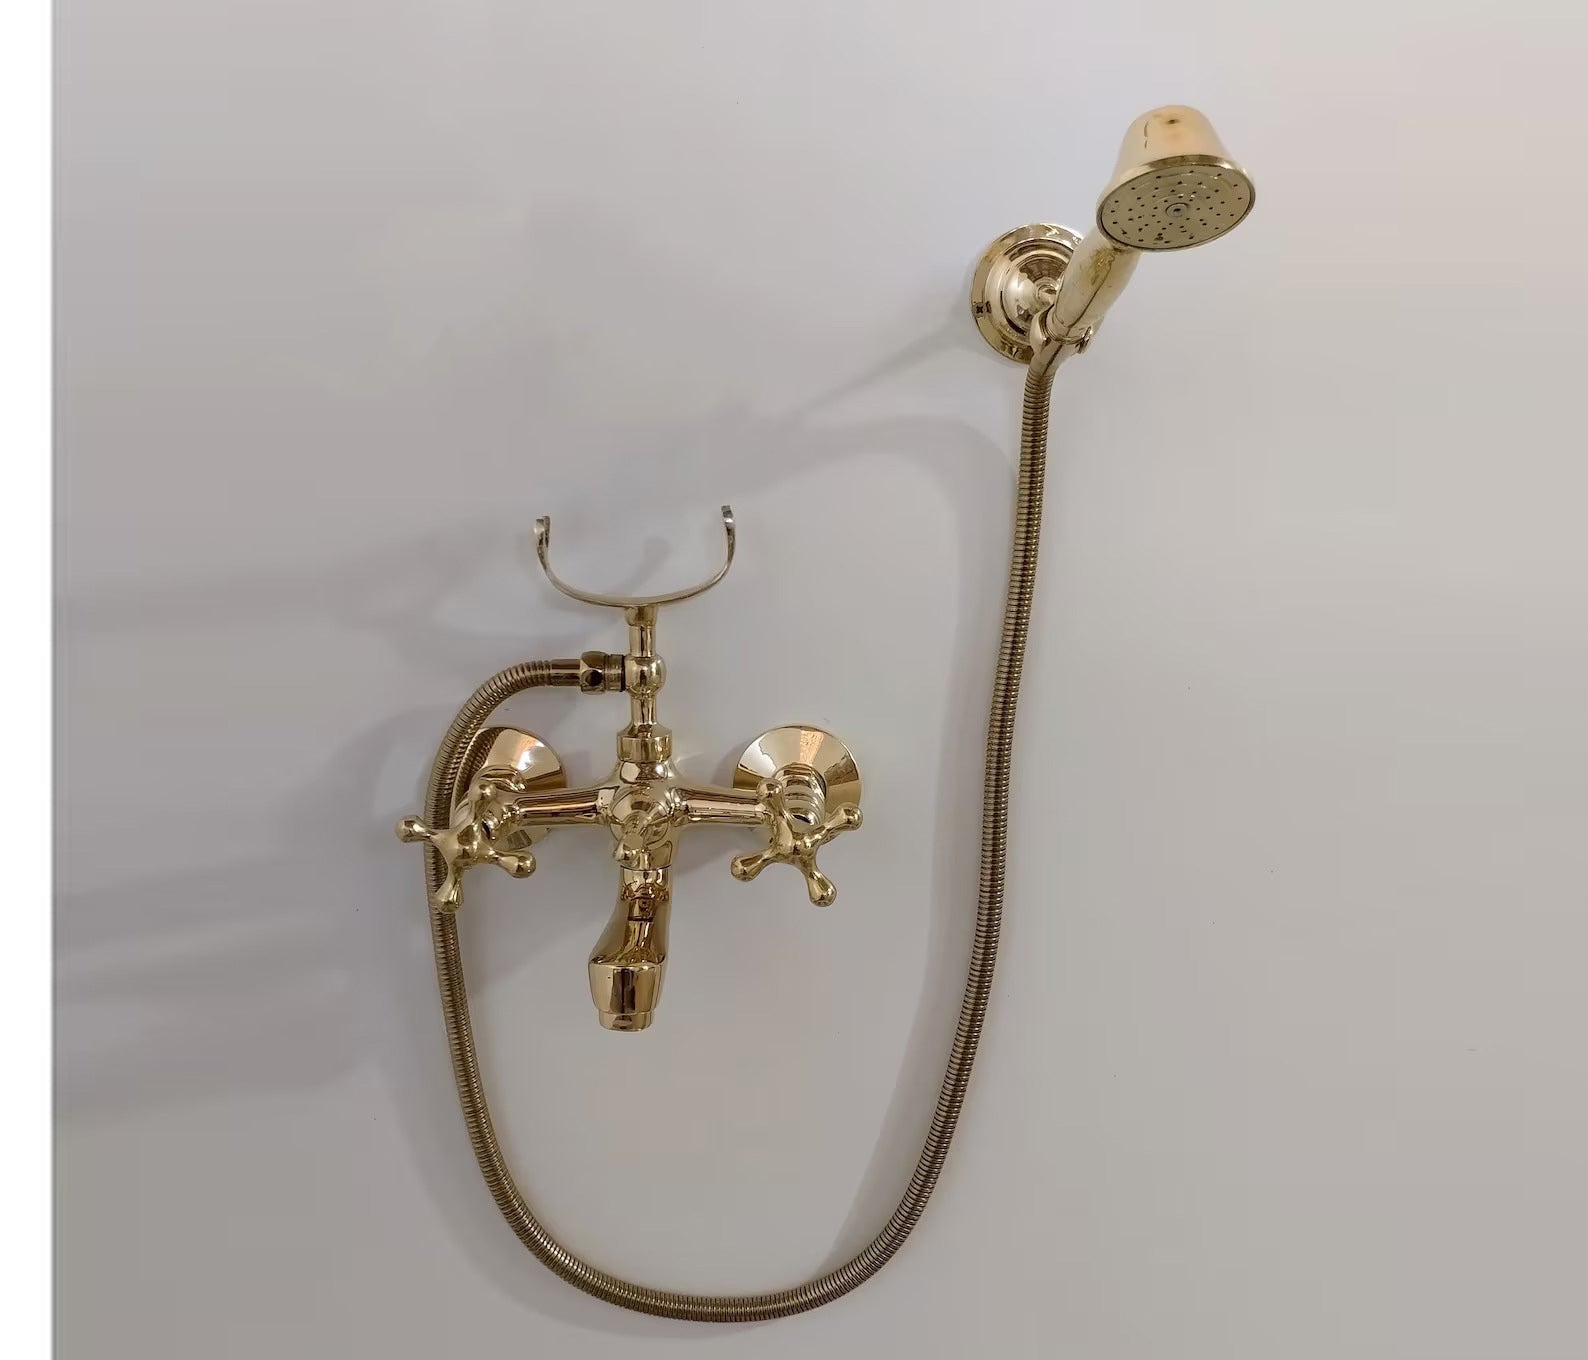 Unlacquered Brass Bathtub Faucet With Handheld Shower Holder - Wall Mounted Tub Faucet - Zayian